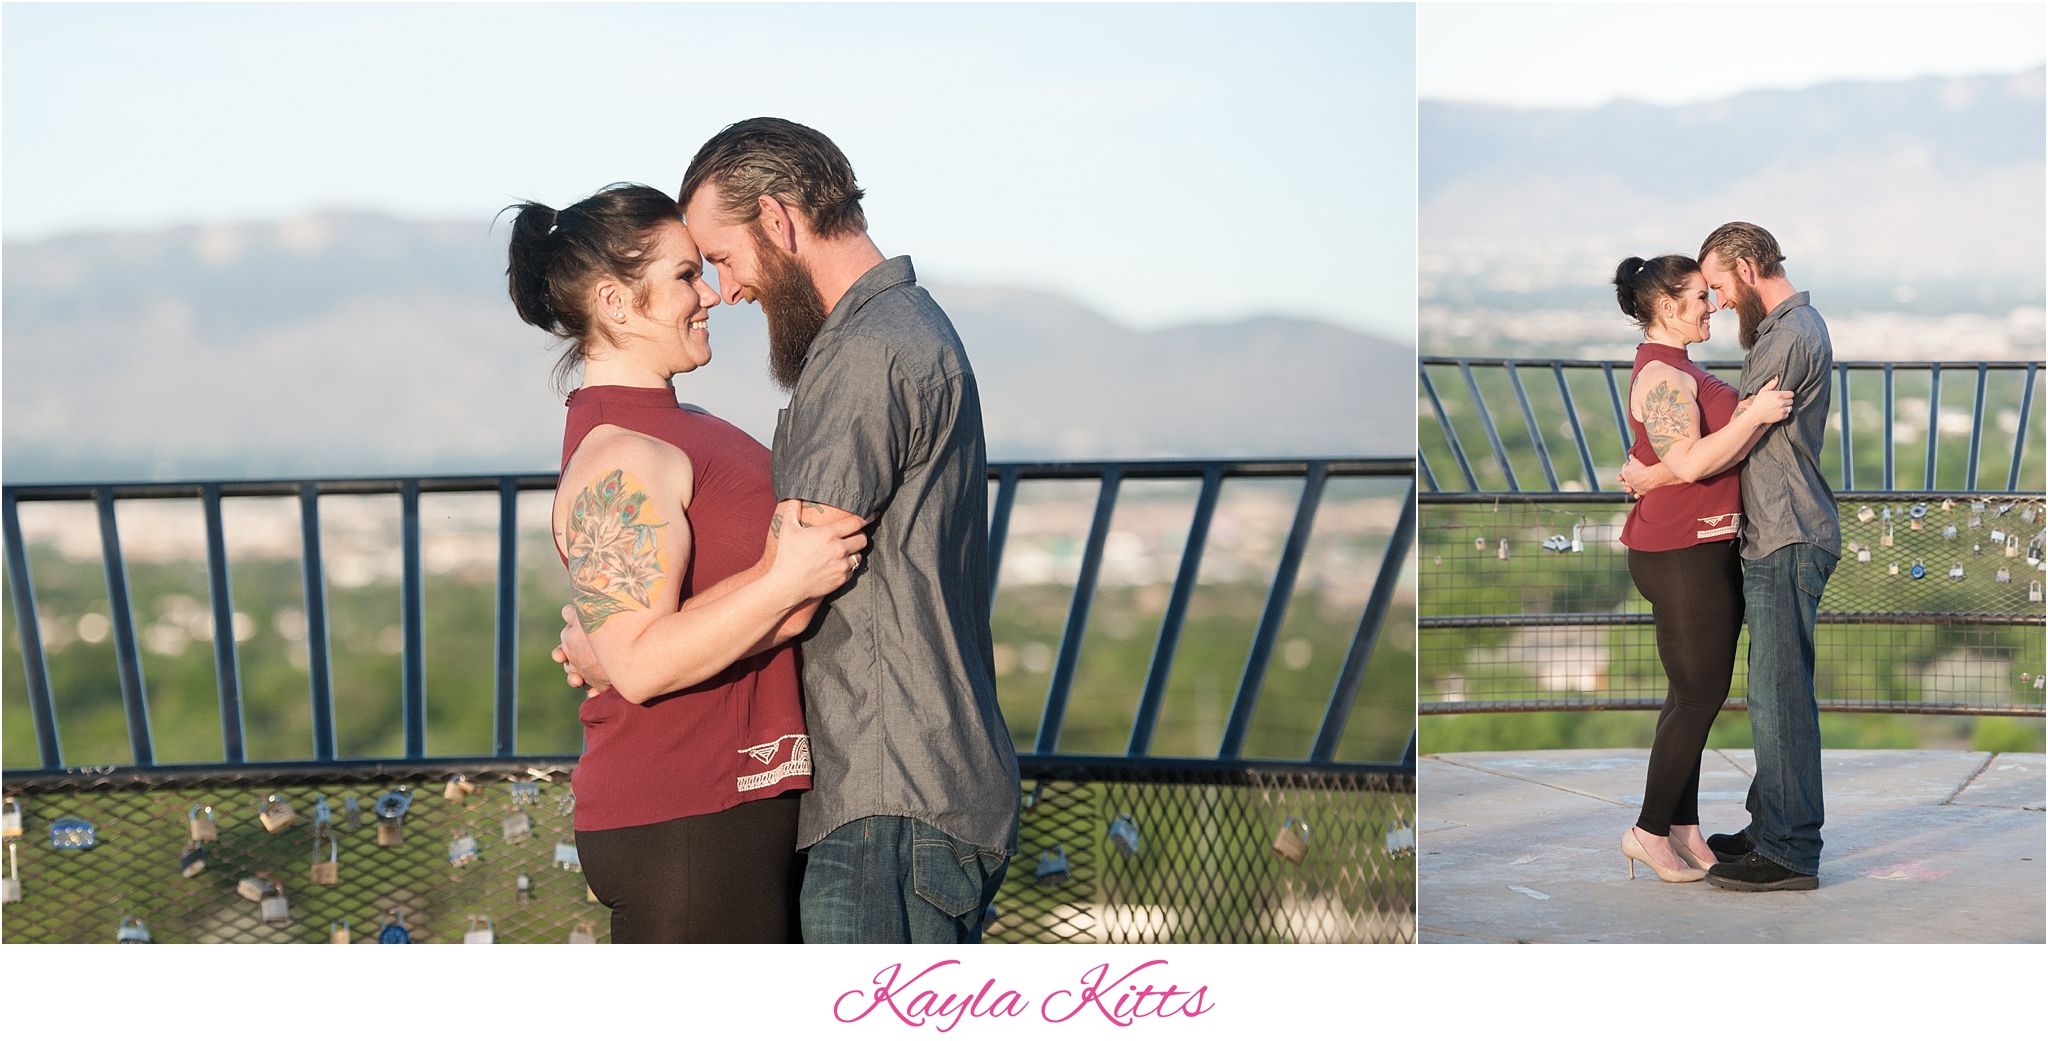 kayla kitts photography - albuquerque wedding photographer - albuquerque engagement photographer - nm wedding - albuquerque wedding - nm wedding - unm engagement - bosque engagement session_0013.jpg